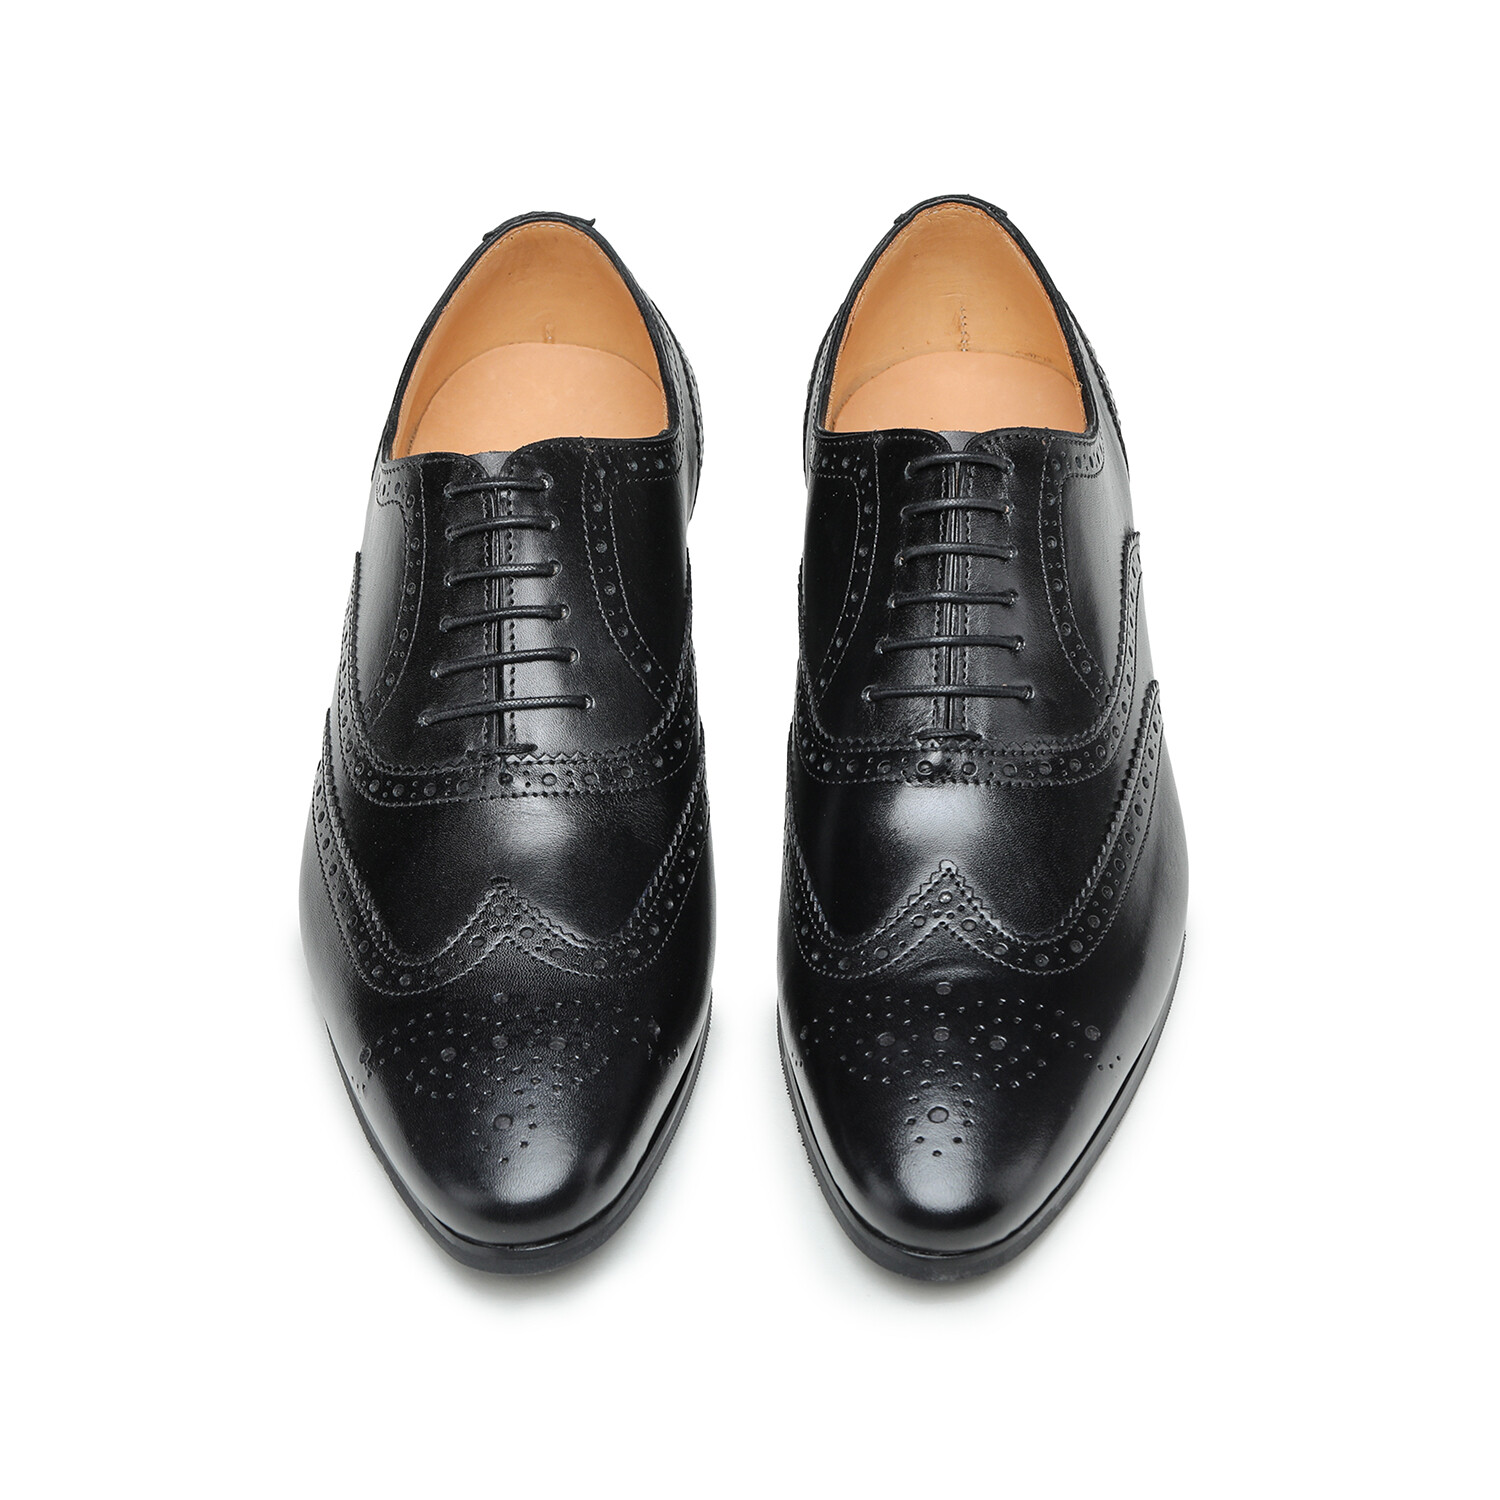 Wingtip Oxford Brogue Leather Shoes // Black (US: 7) - ToMo Clearance ...